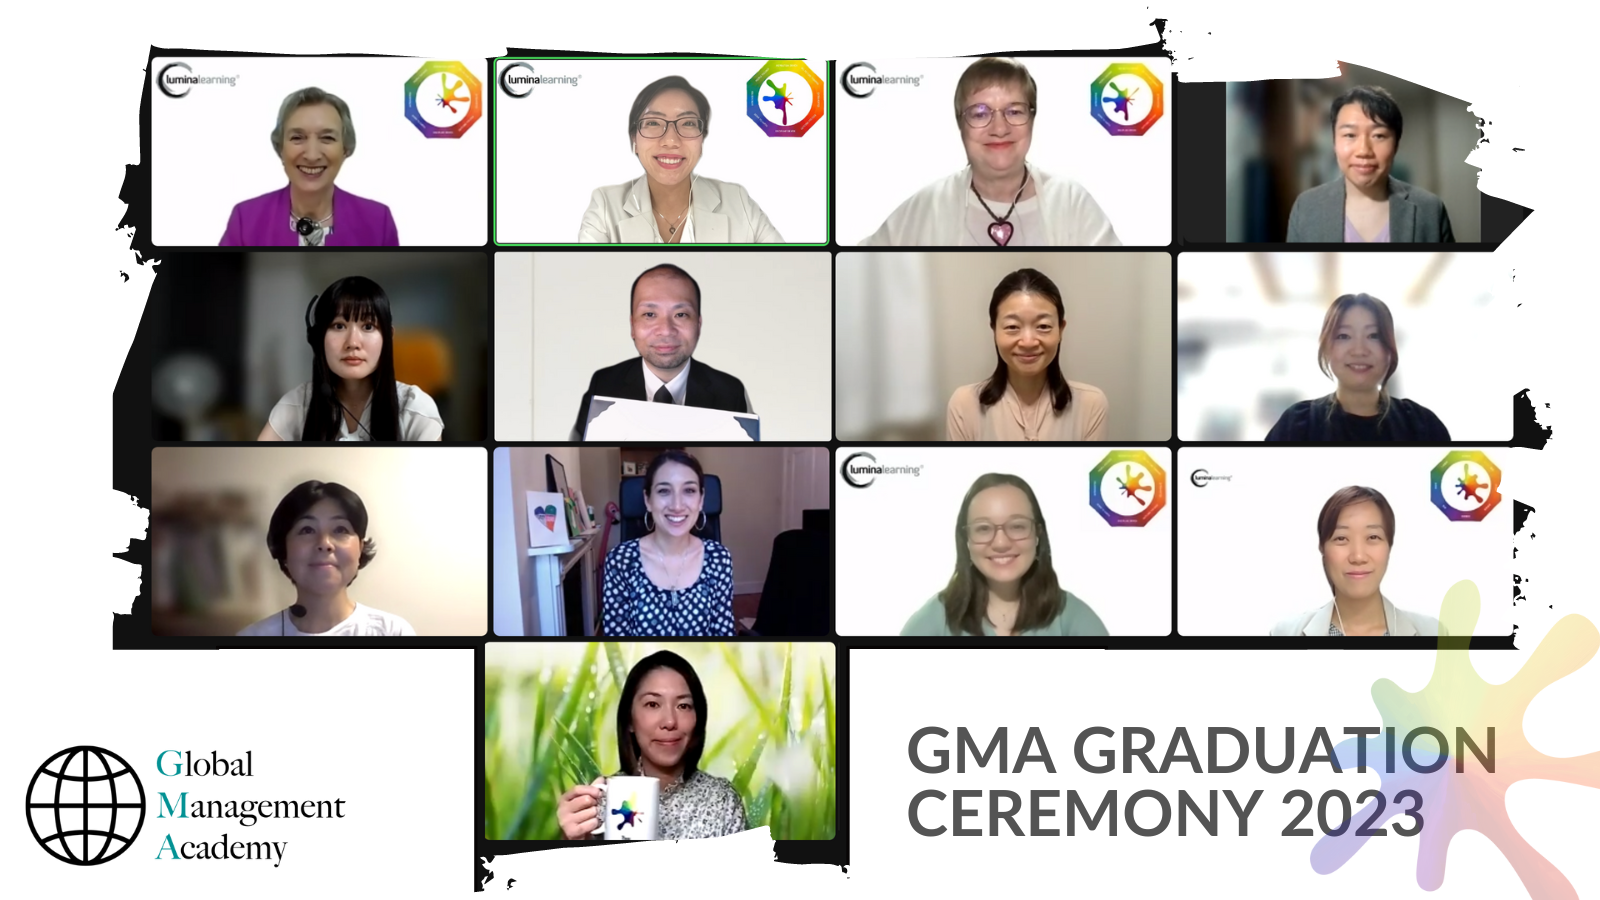 Global Management Academy Graduation in 2023